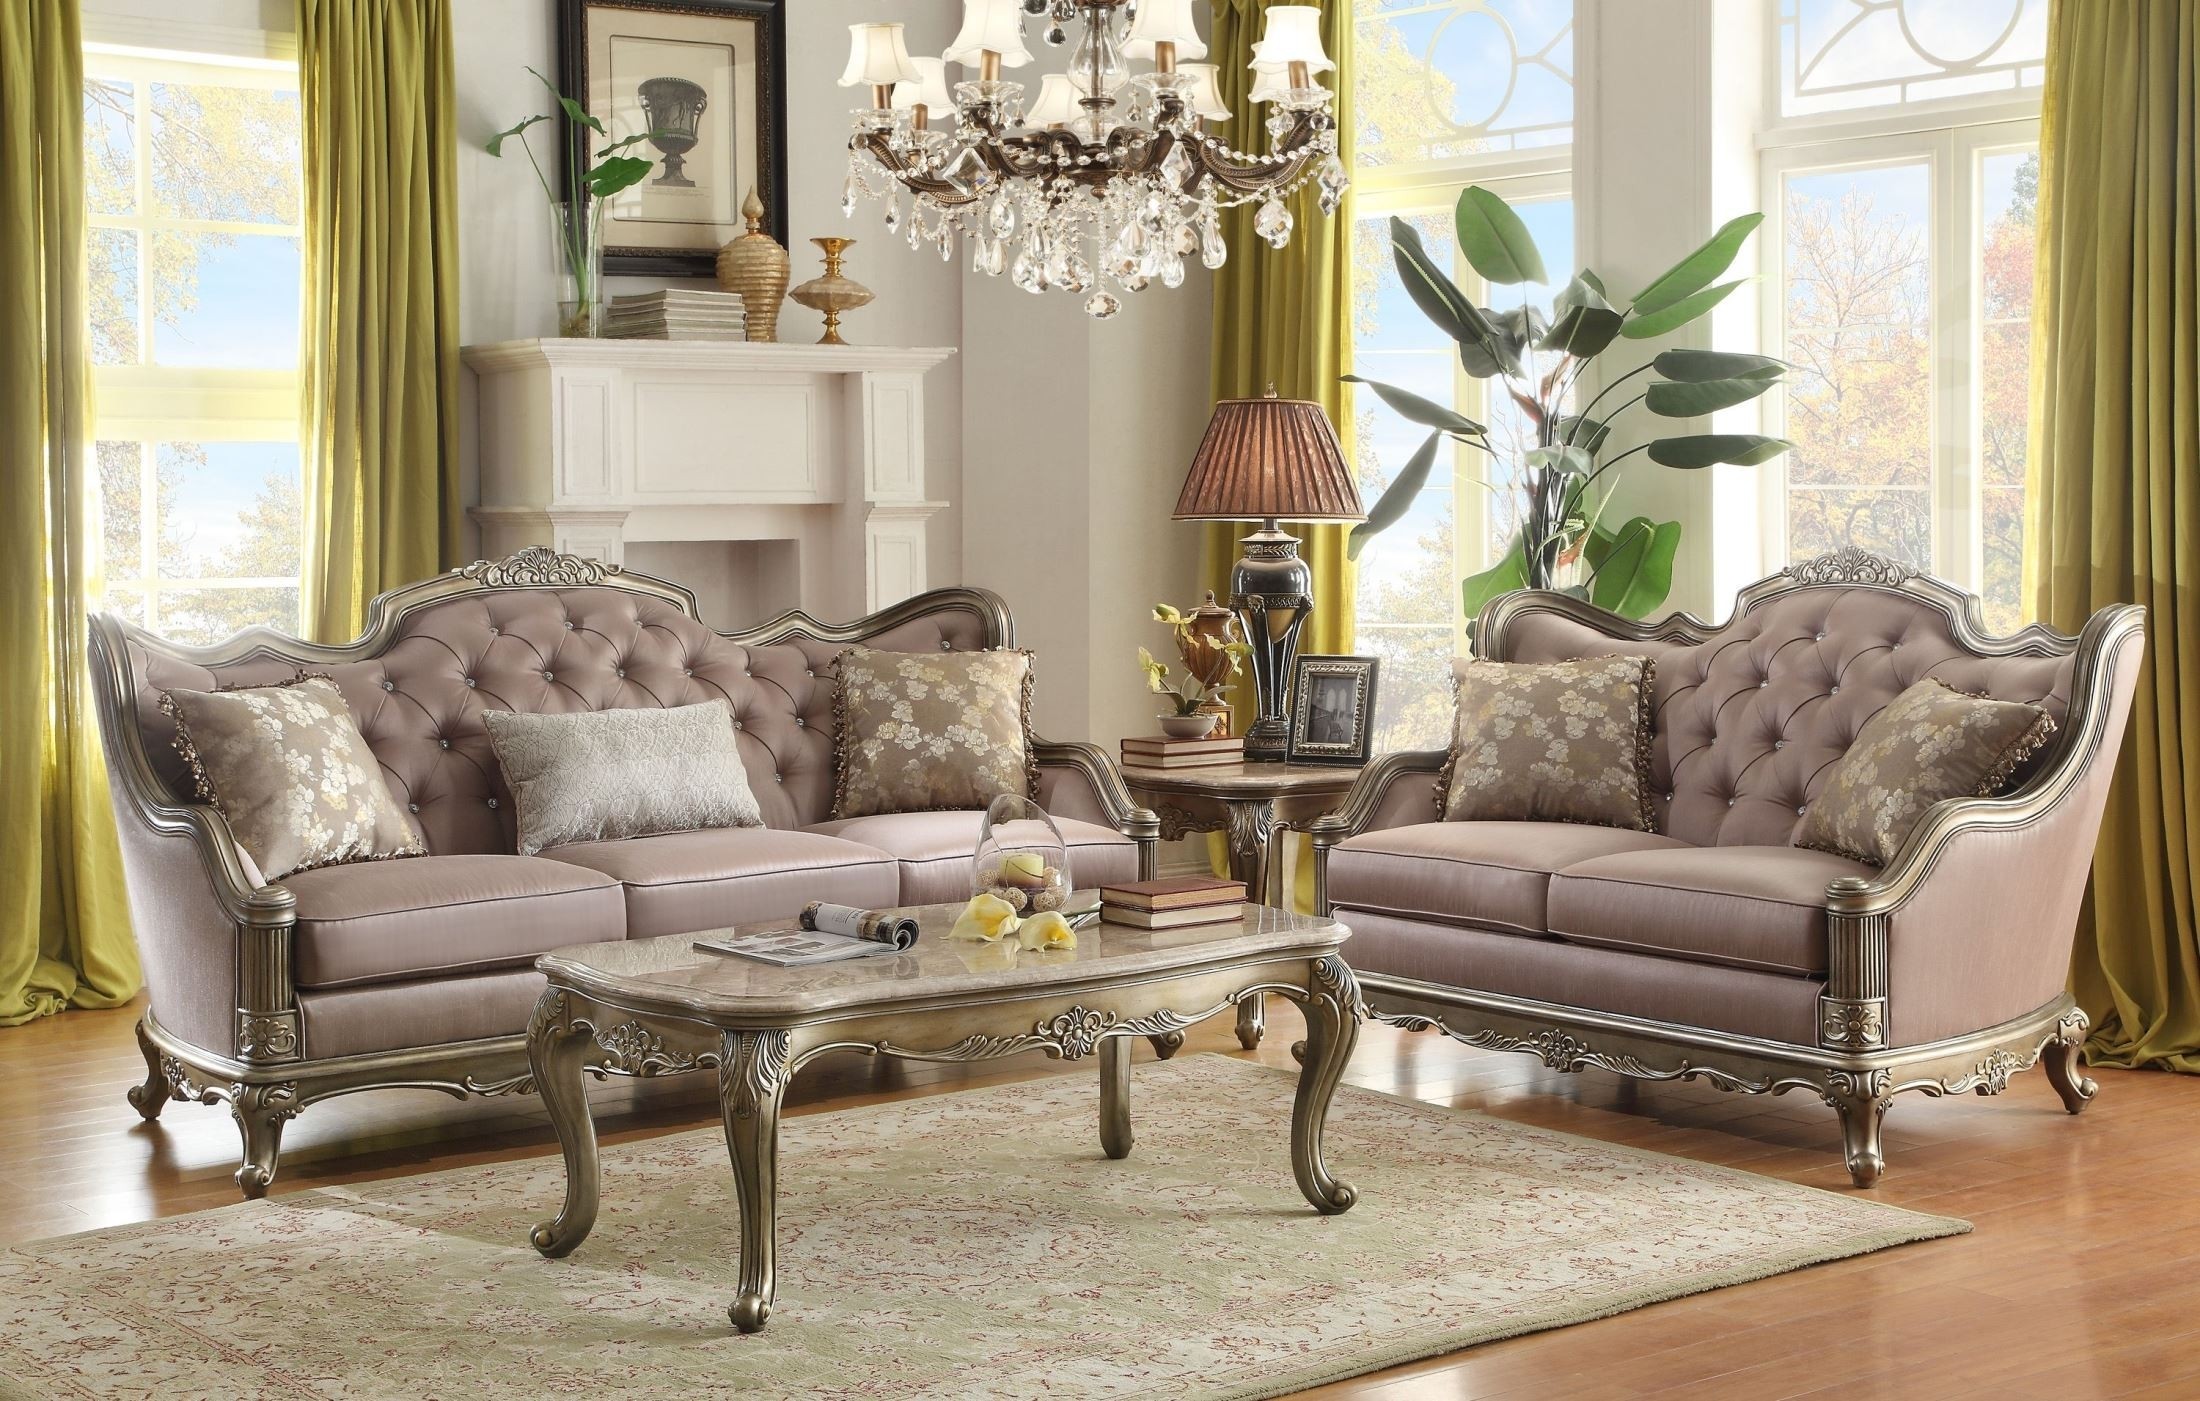 Fiorella gold faux silk living room set from homelegance